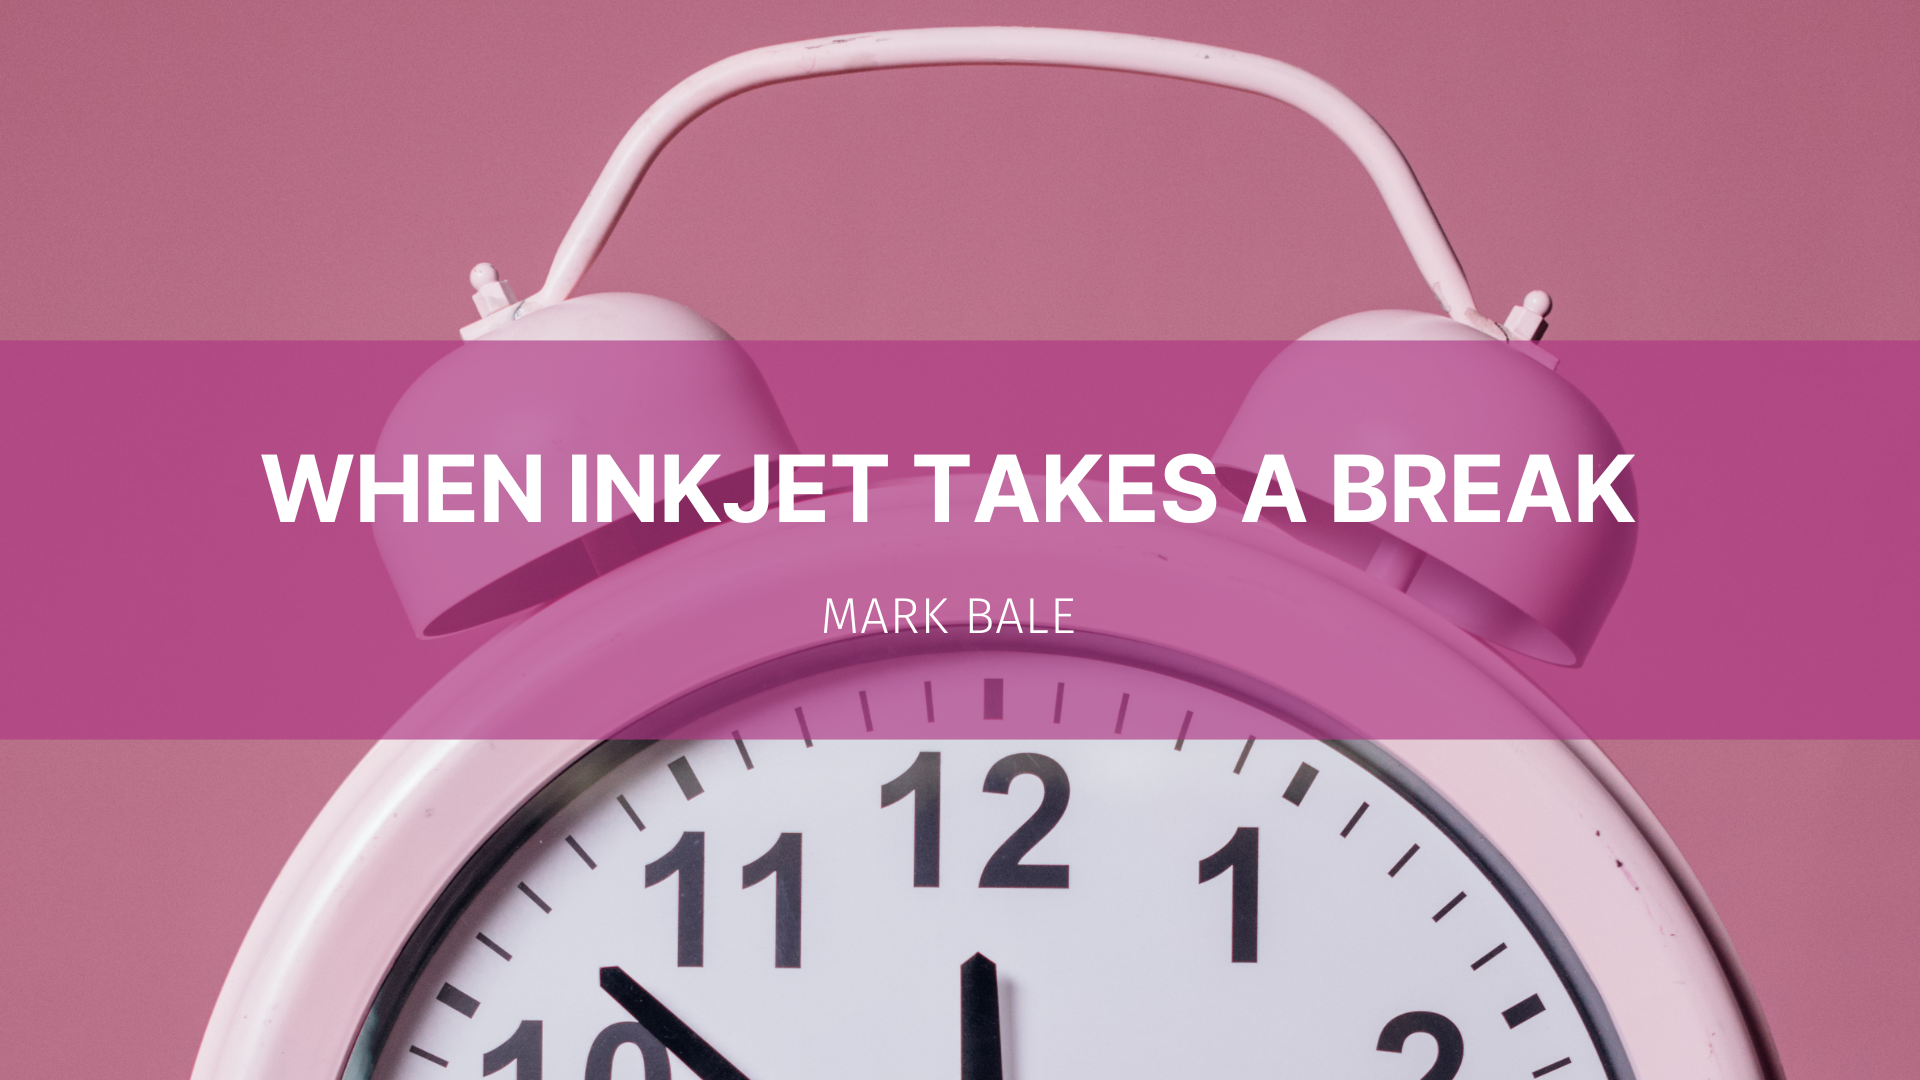 Featured image for “When inkjet takes a break”